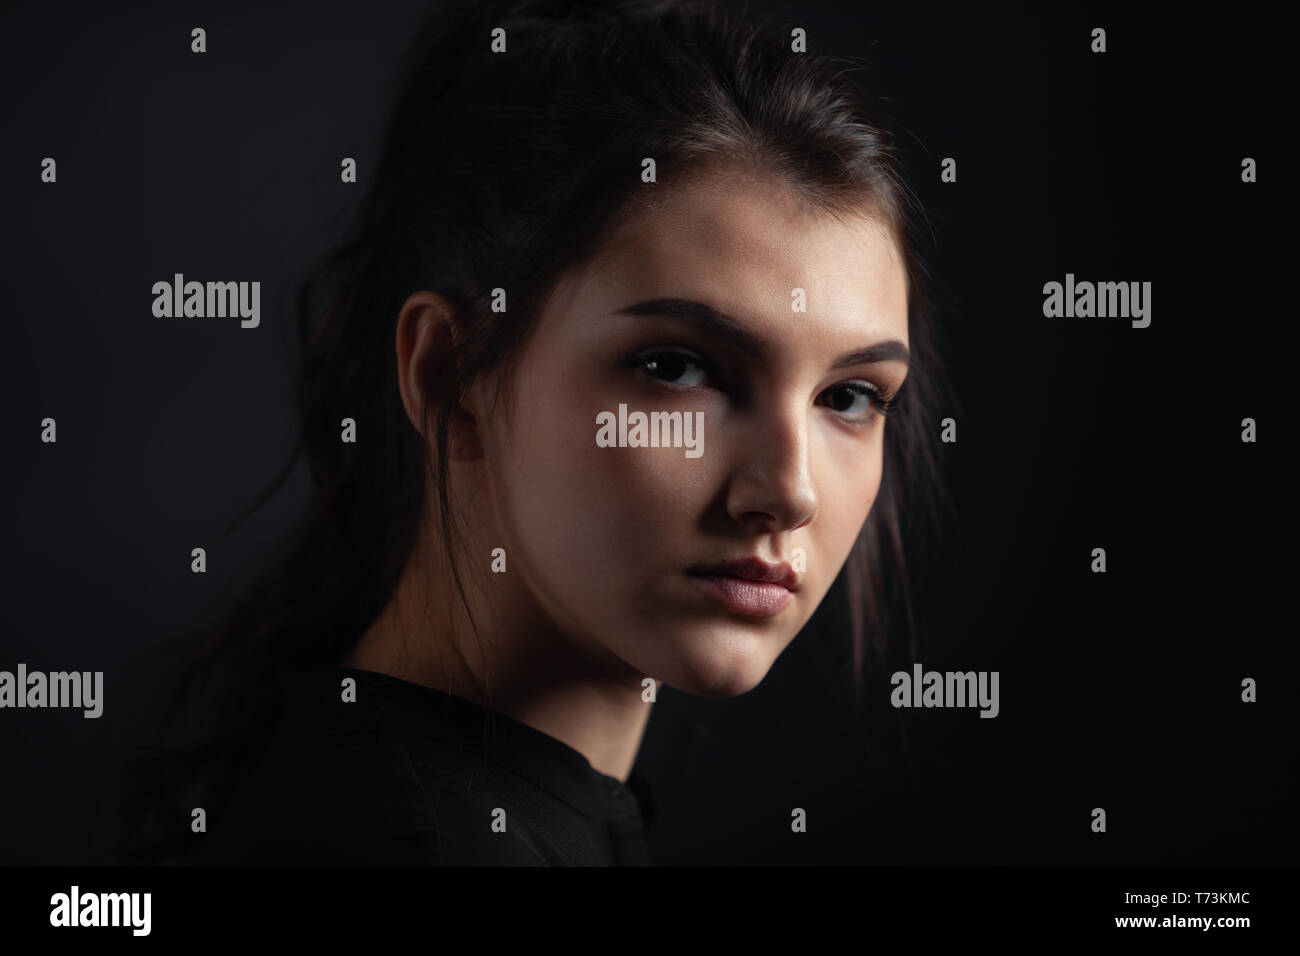 Dramatic portrait of a beautiful lonely girl on a dark background in studio Stock Photo